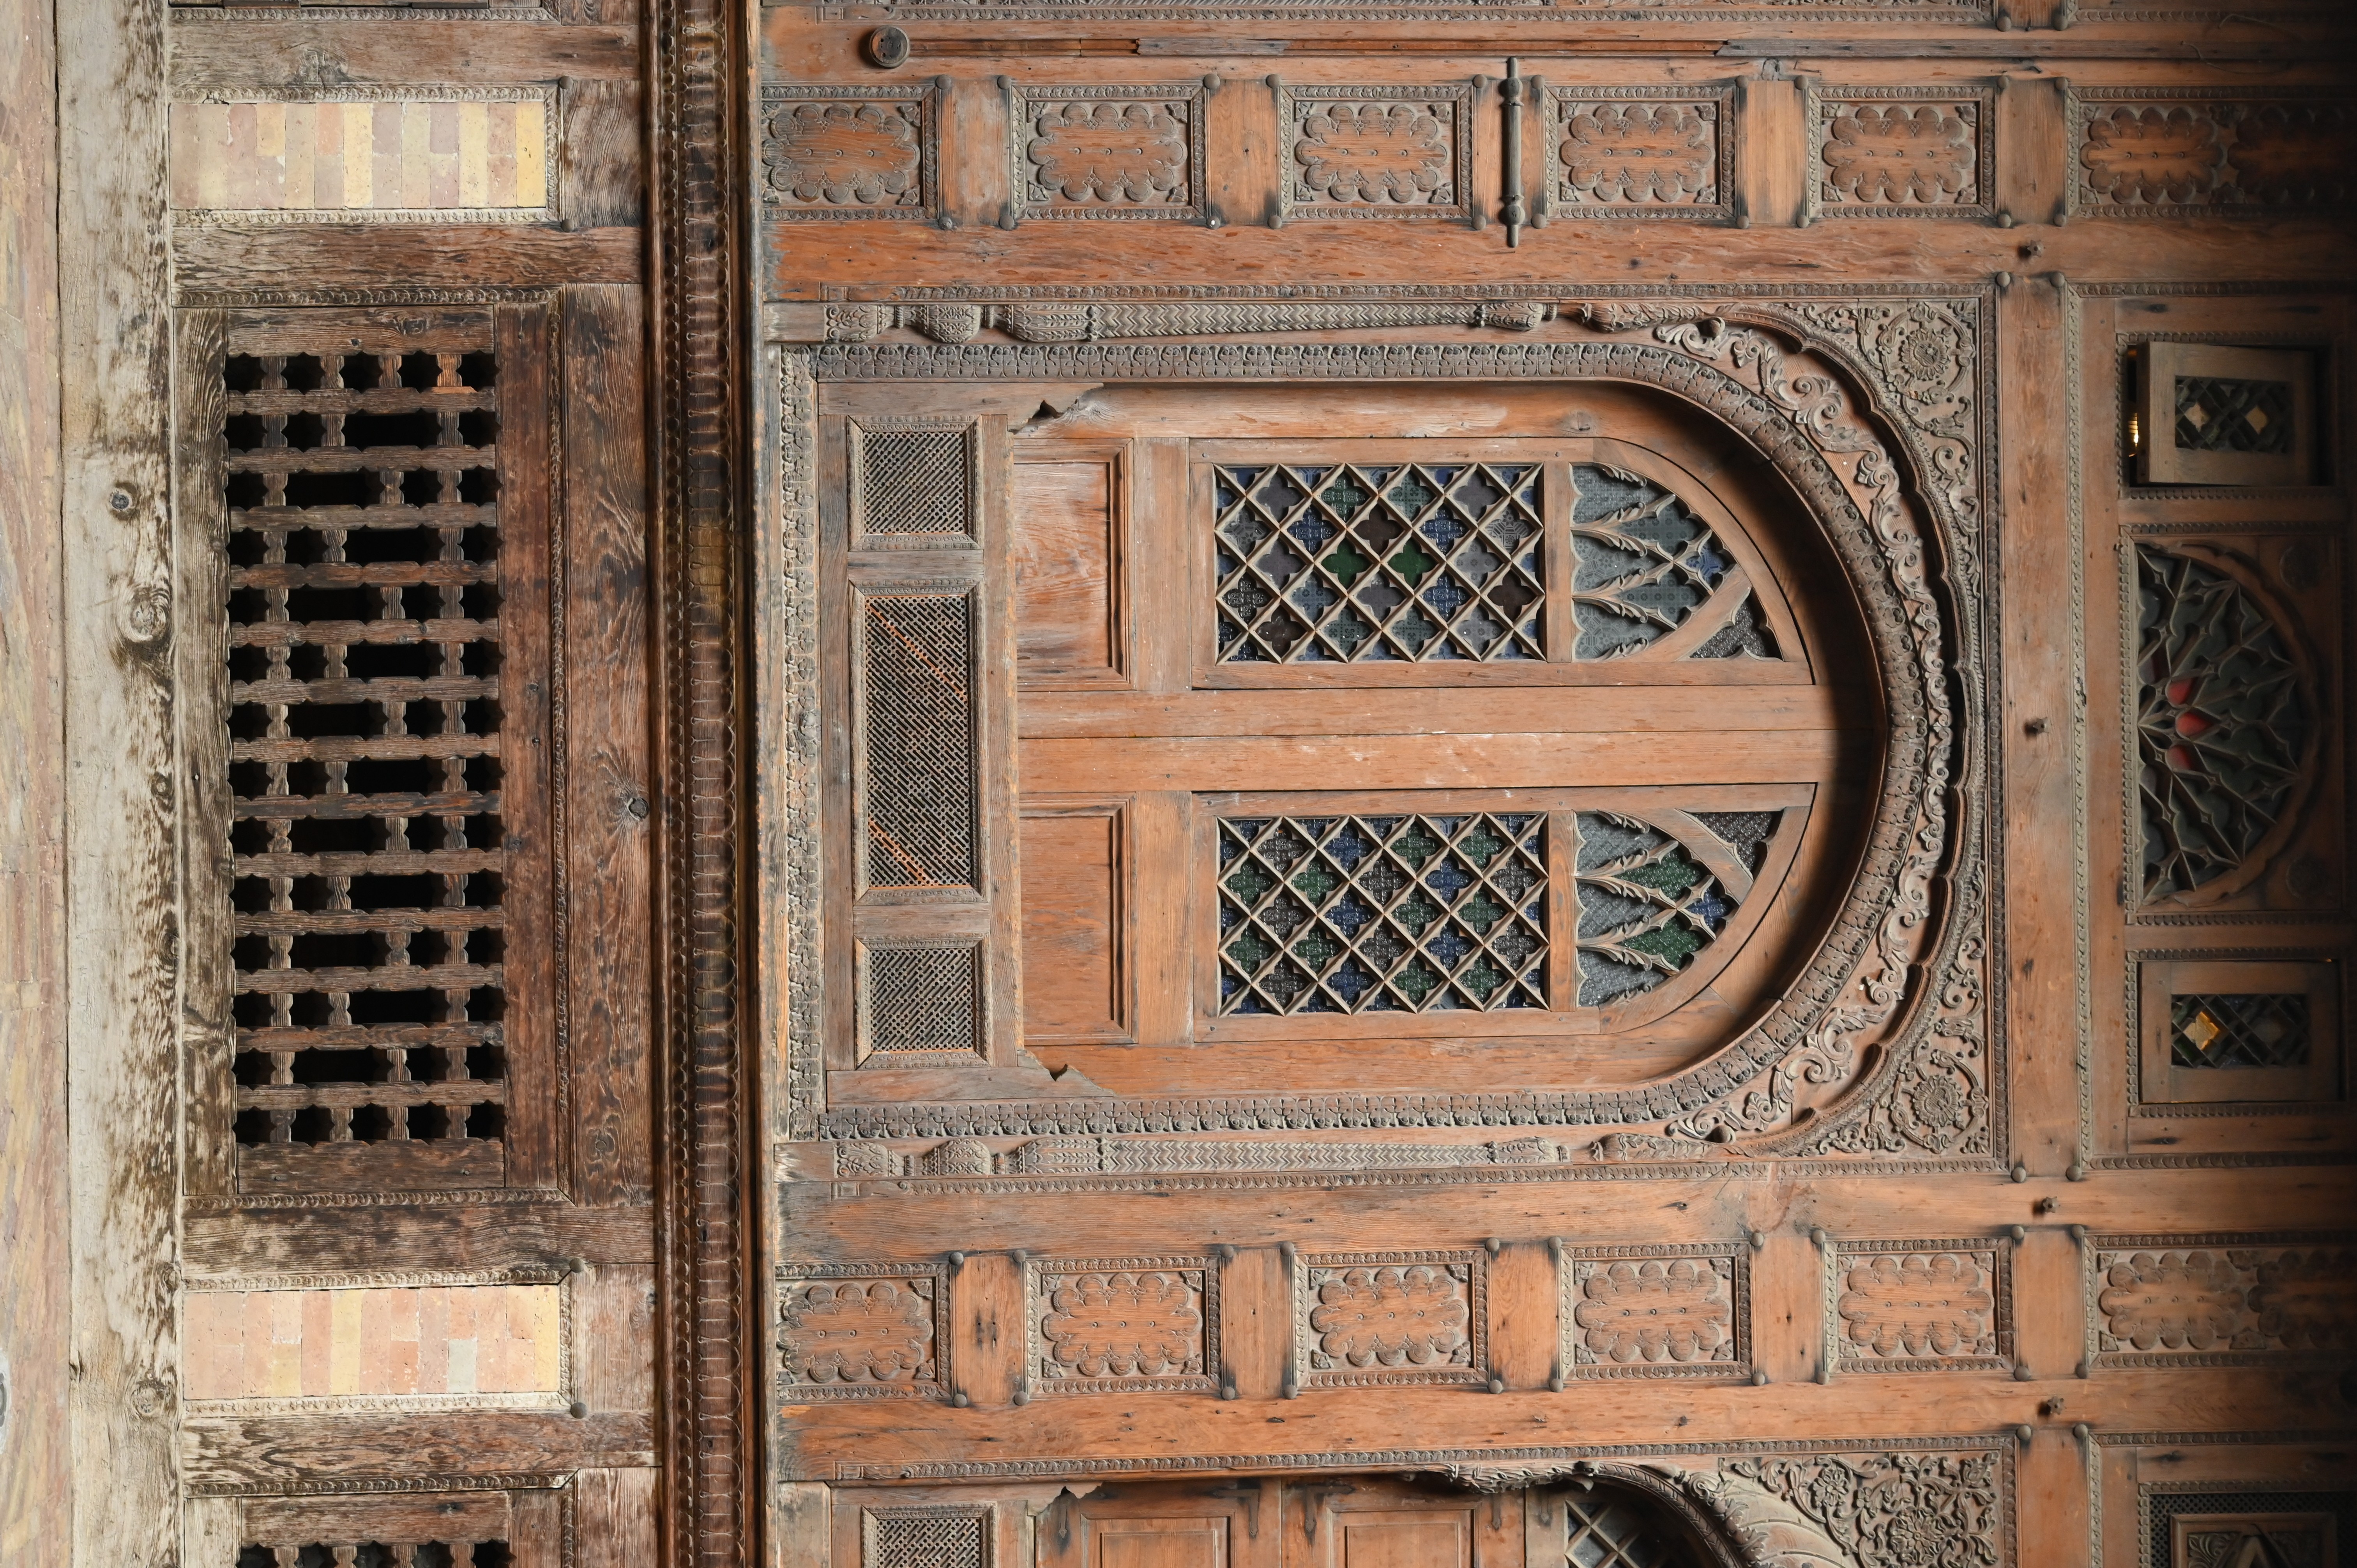 A beautiful wooden window frame inspired by Central Asian and Gandharan architectures